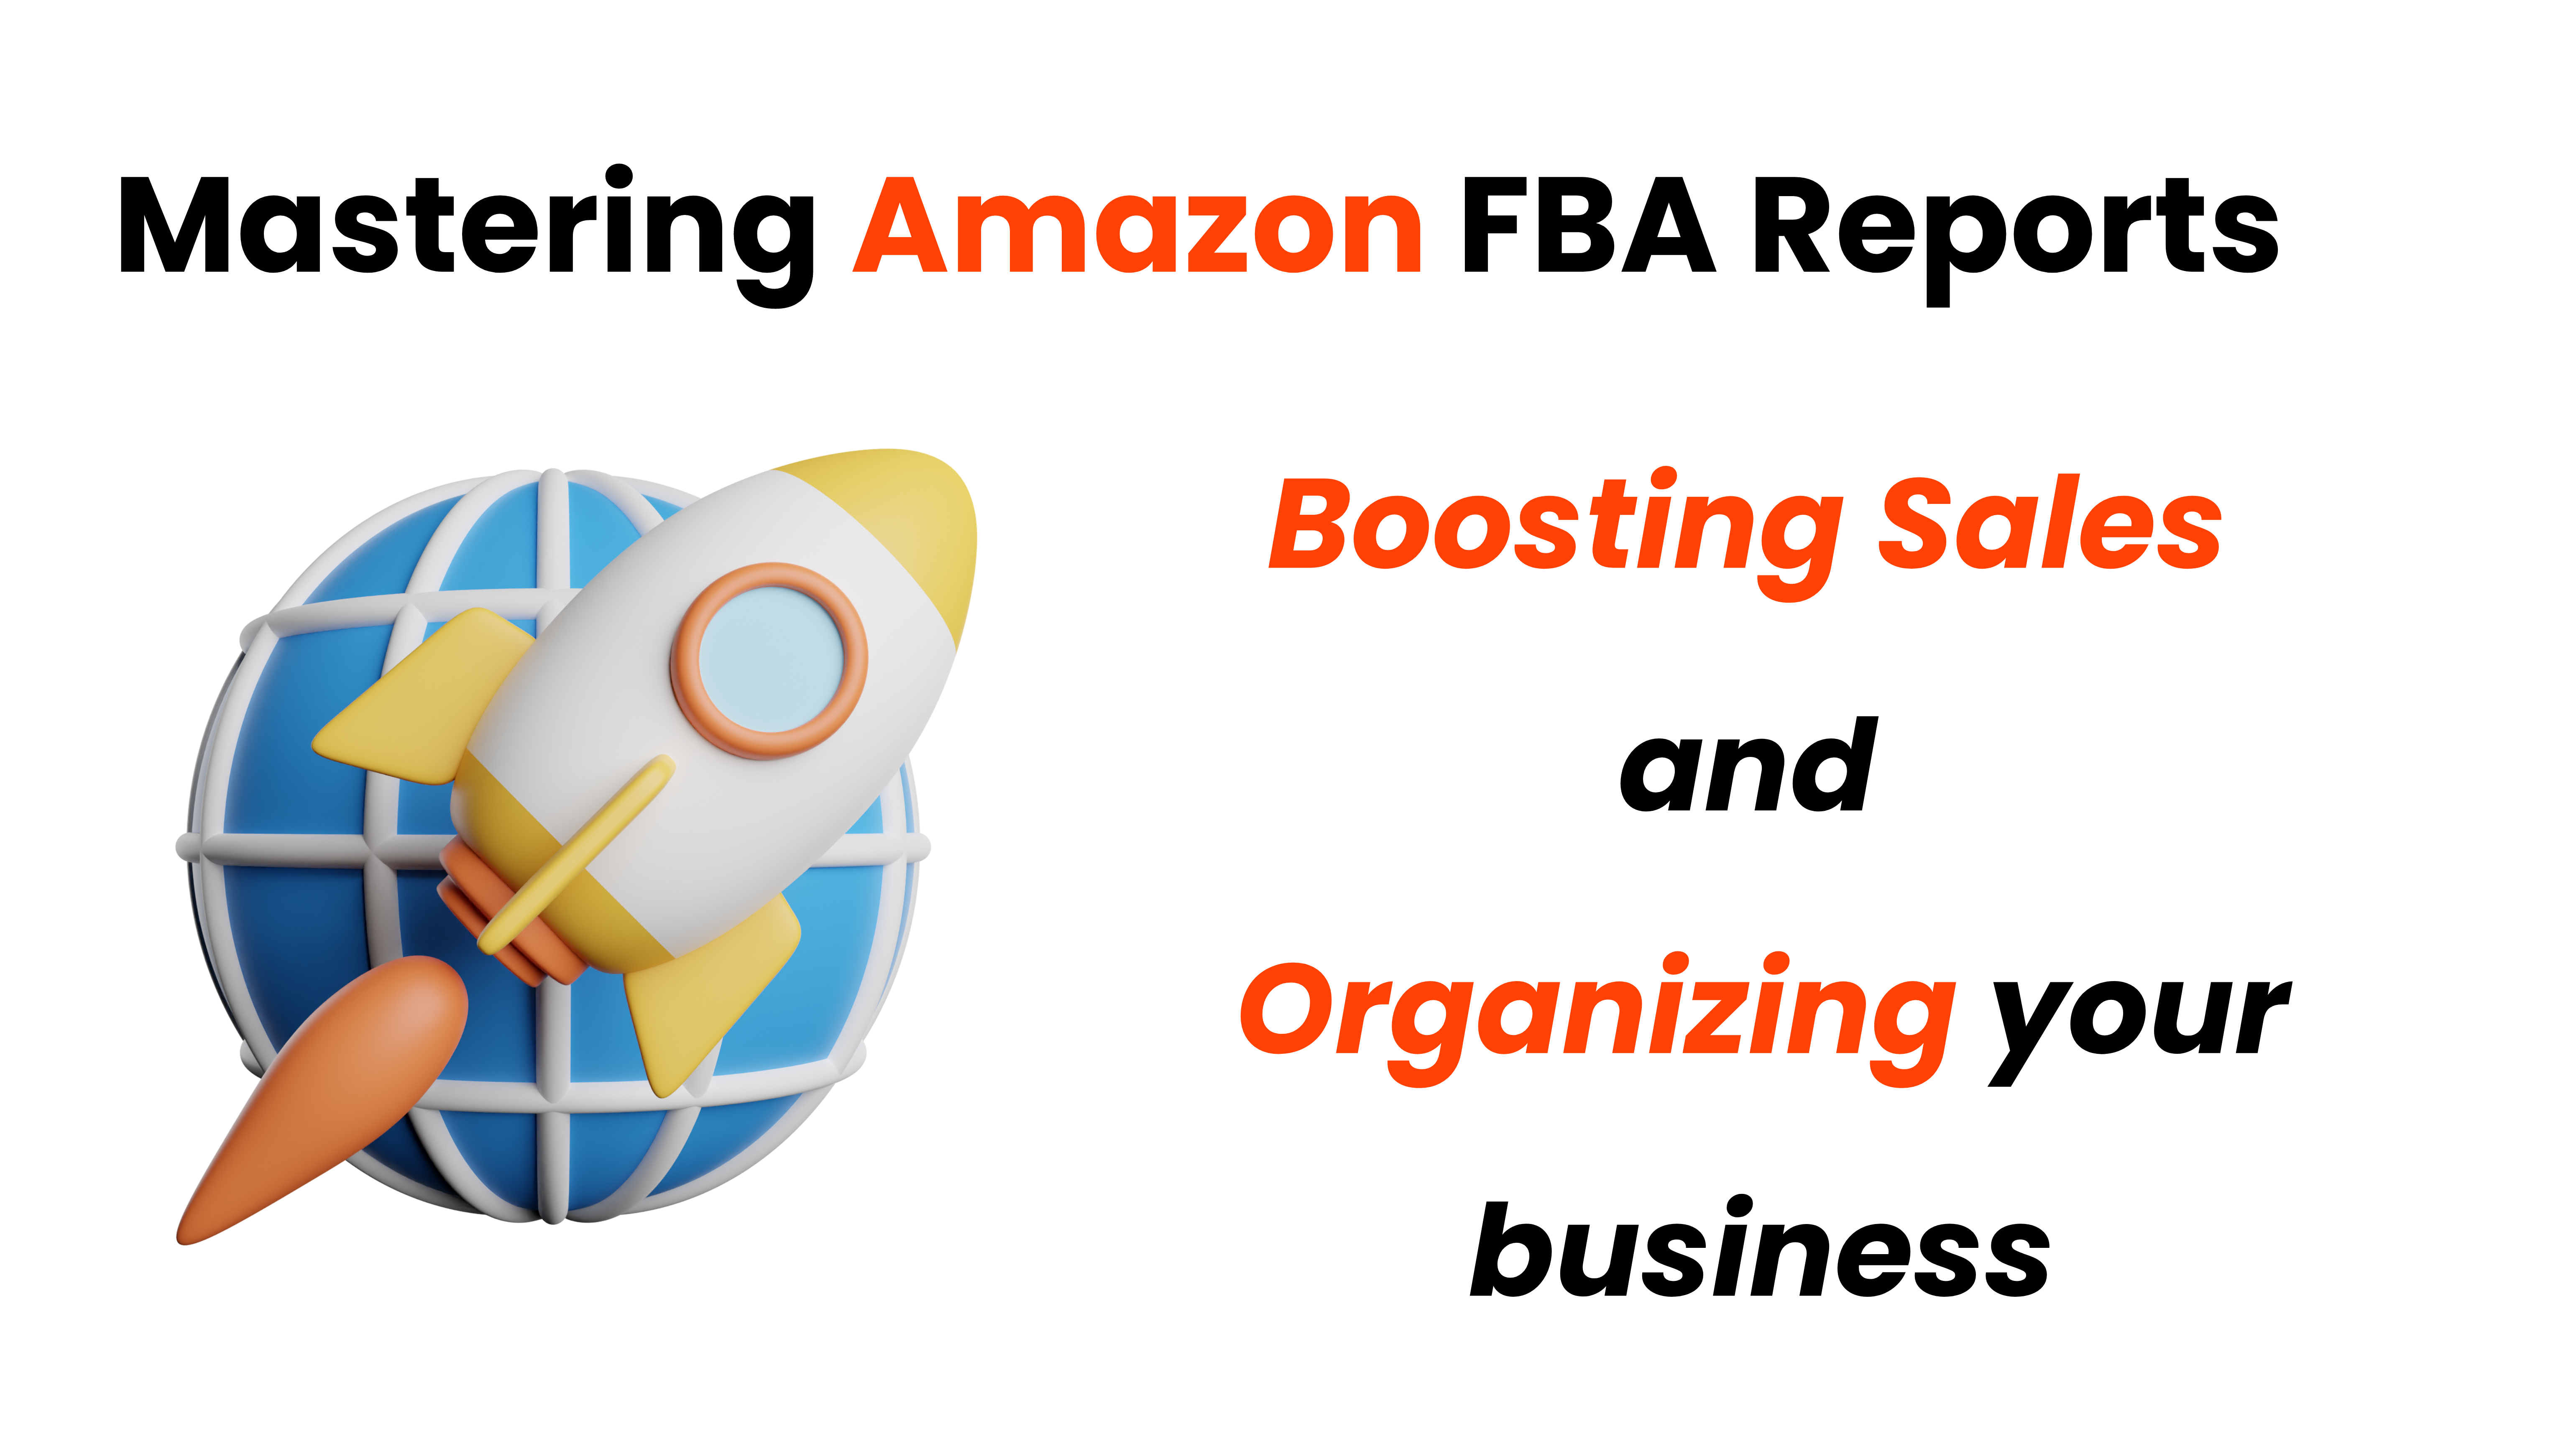 Amazon FBA Reports: A Comprehensive Guide for Amazon Sellers